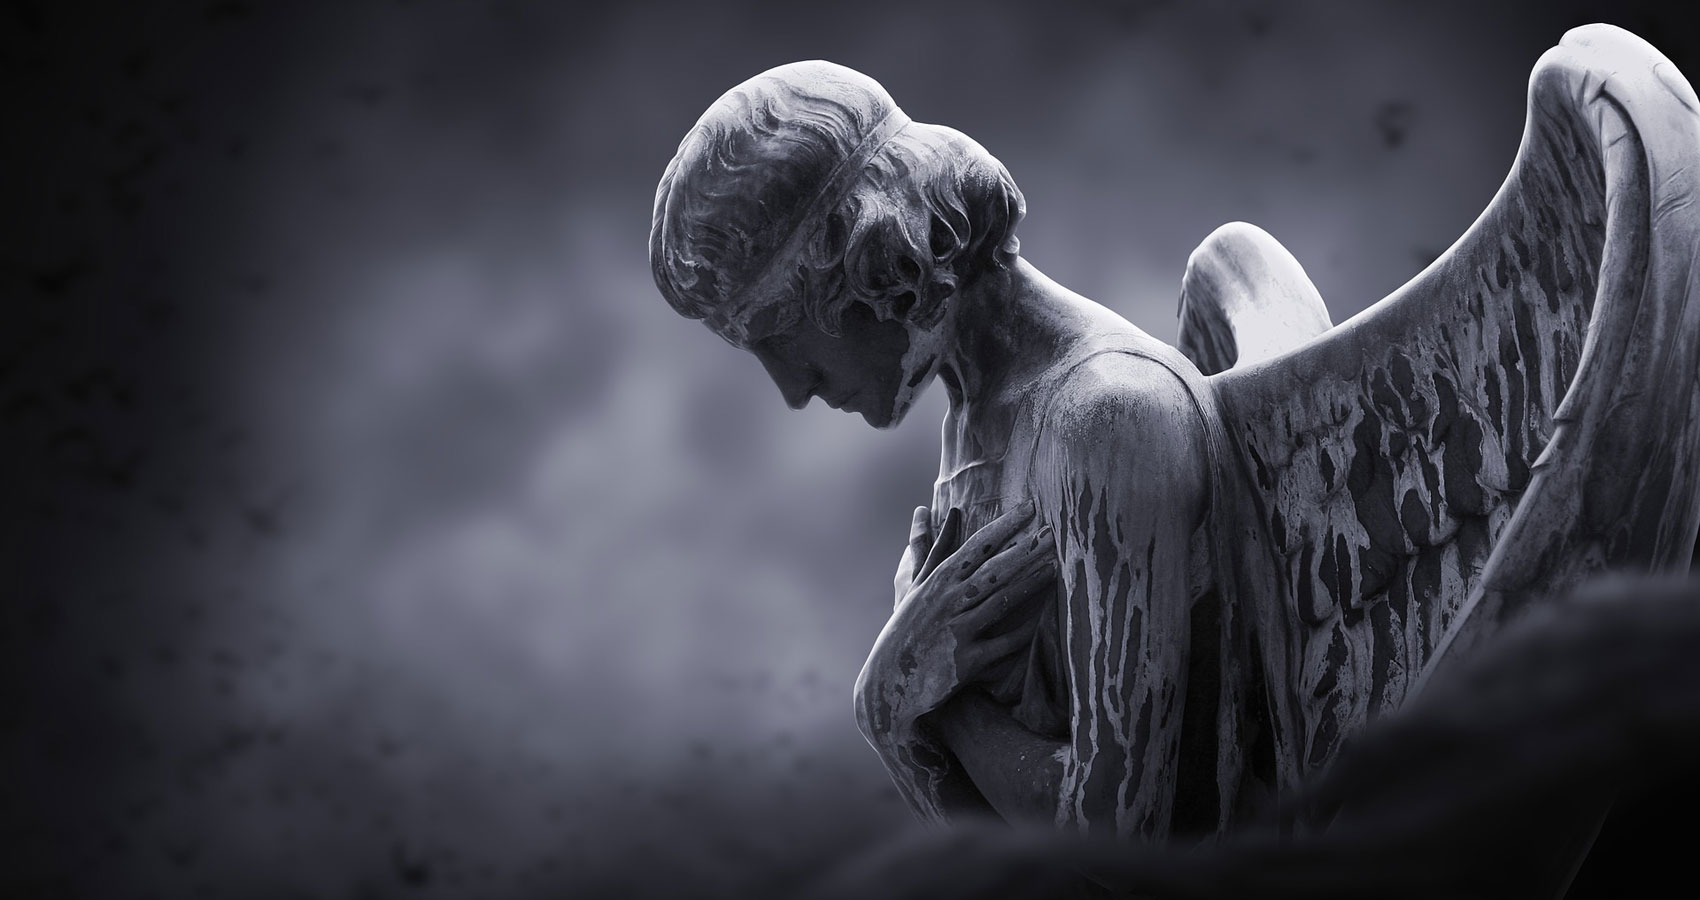 Angel of Mine, a short story by Andrew Scobie at Spillwords.com